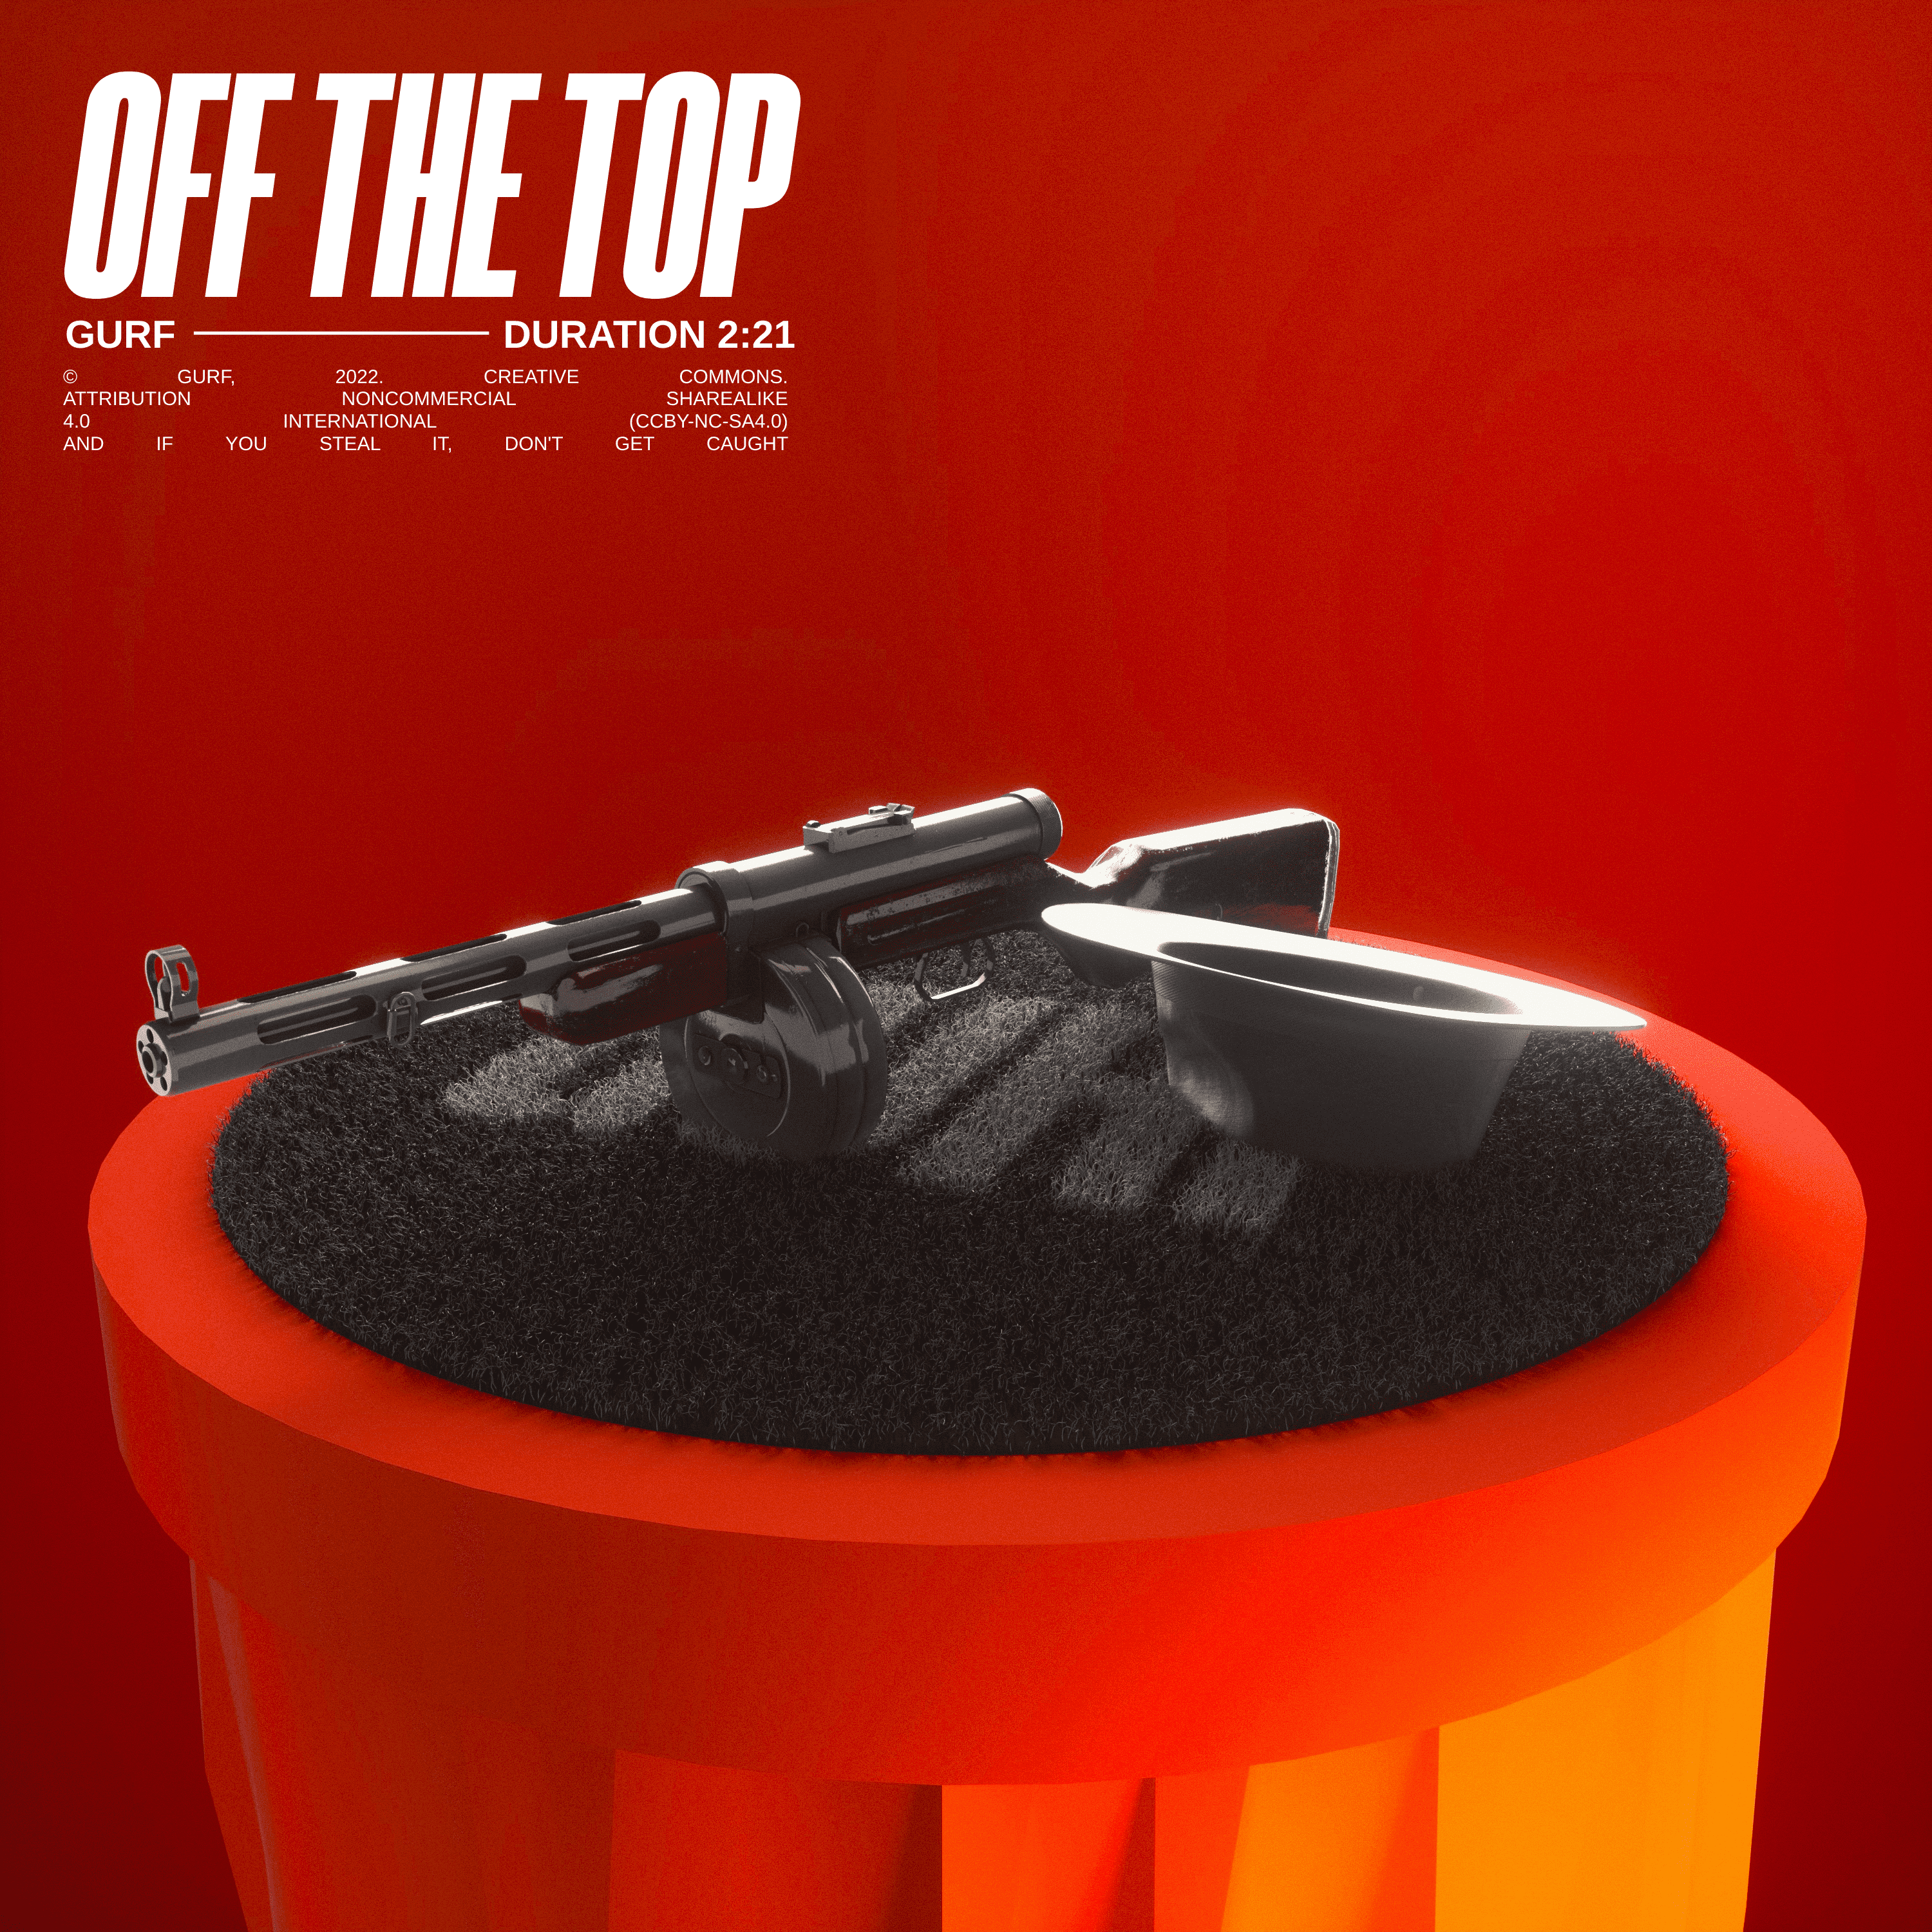 Cover art for GURF's song: OFF THE TOP